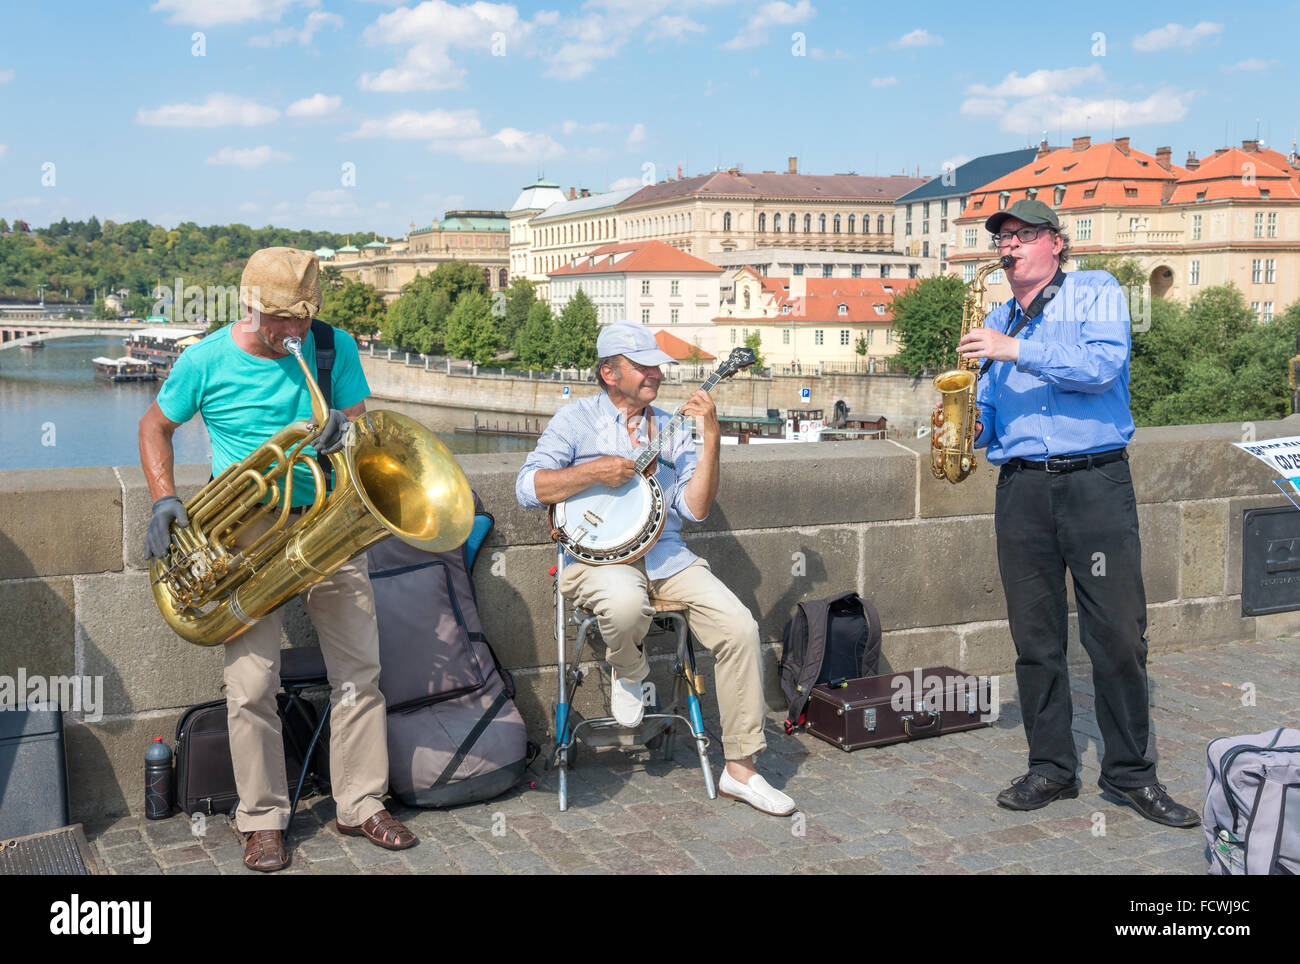 PRAGUE - AUGUST 6: buskers playing  on the famous Charles Bridge, completed in 1400 and is 515 meters long  on august 6,2015 in  Stock Photo